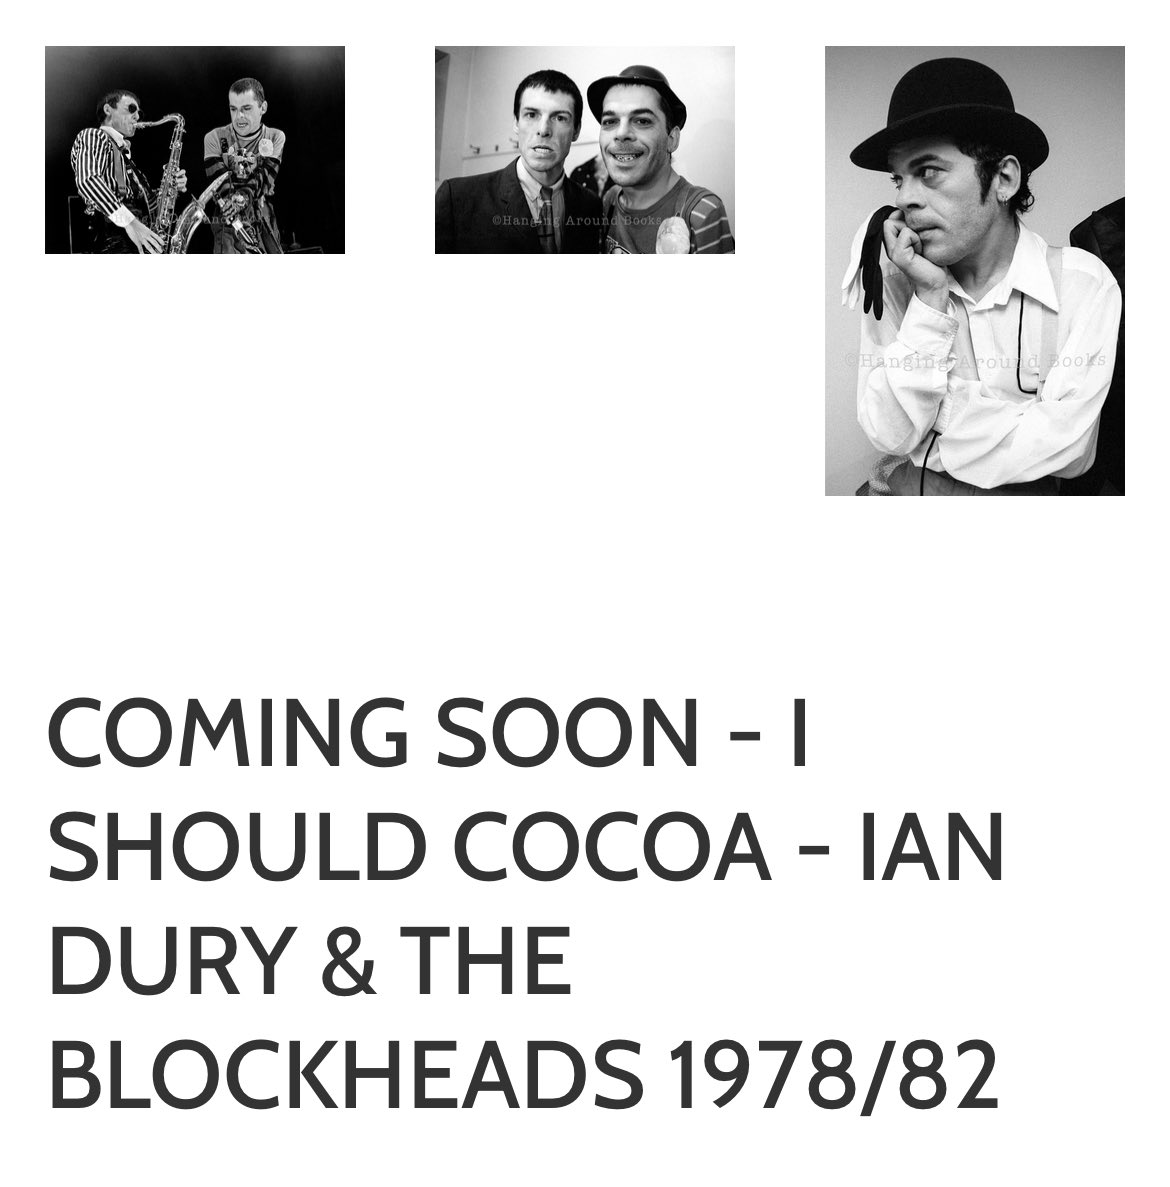 I SHOULD COCOA by #davidcoriophotographer Iconic images from one of Ian Dury and the Blockheads’s favourite photographers. On sale 27.05.24. #iandury #theblockheads #davidcorio #rockphotography